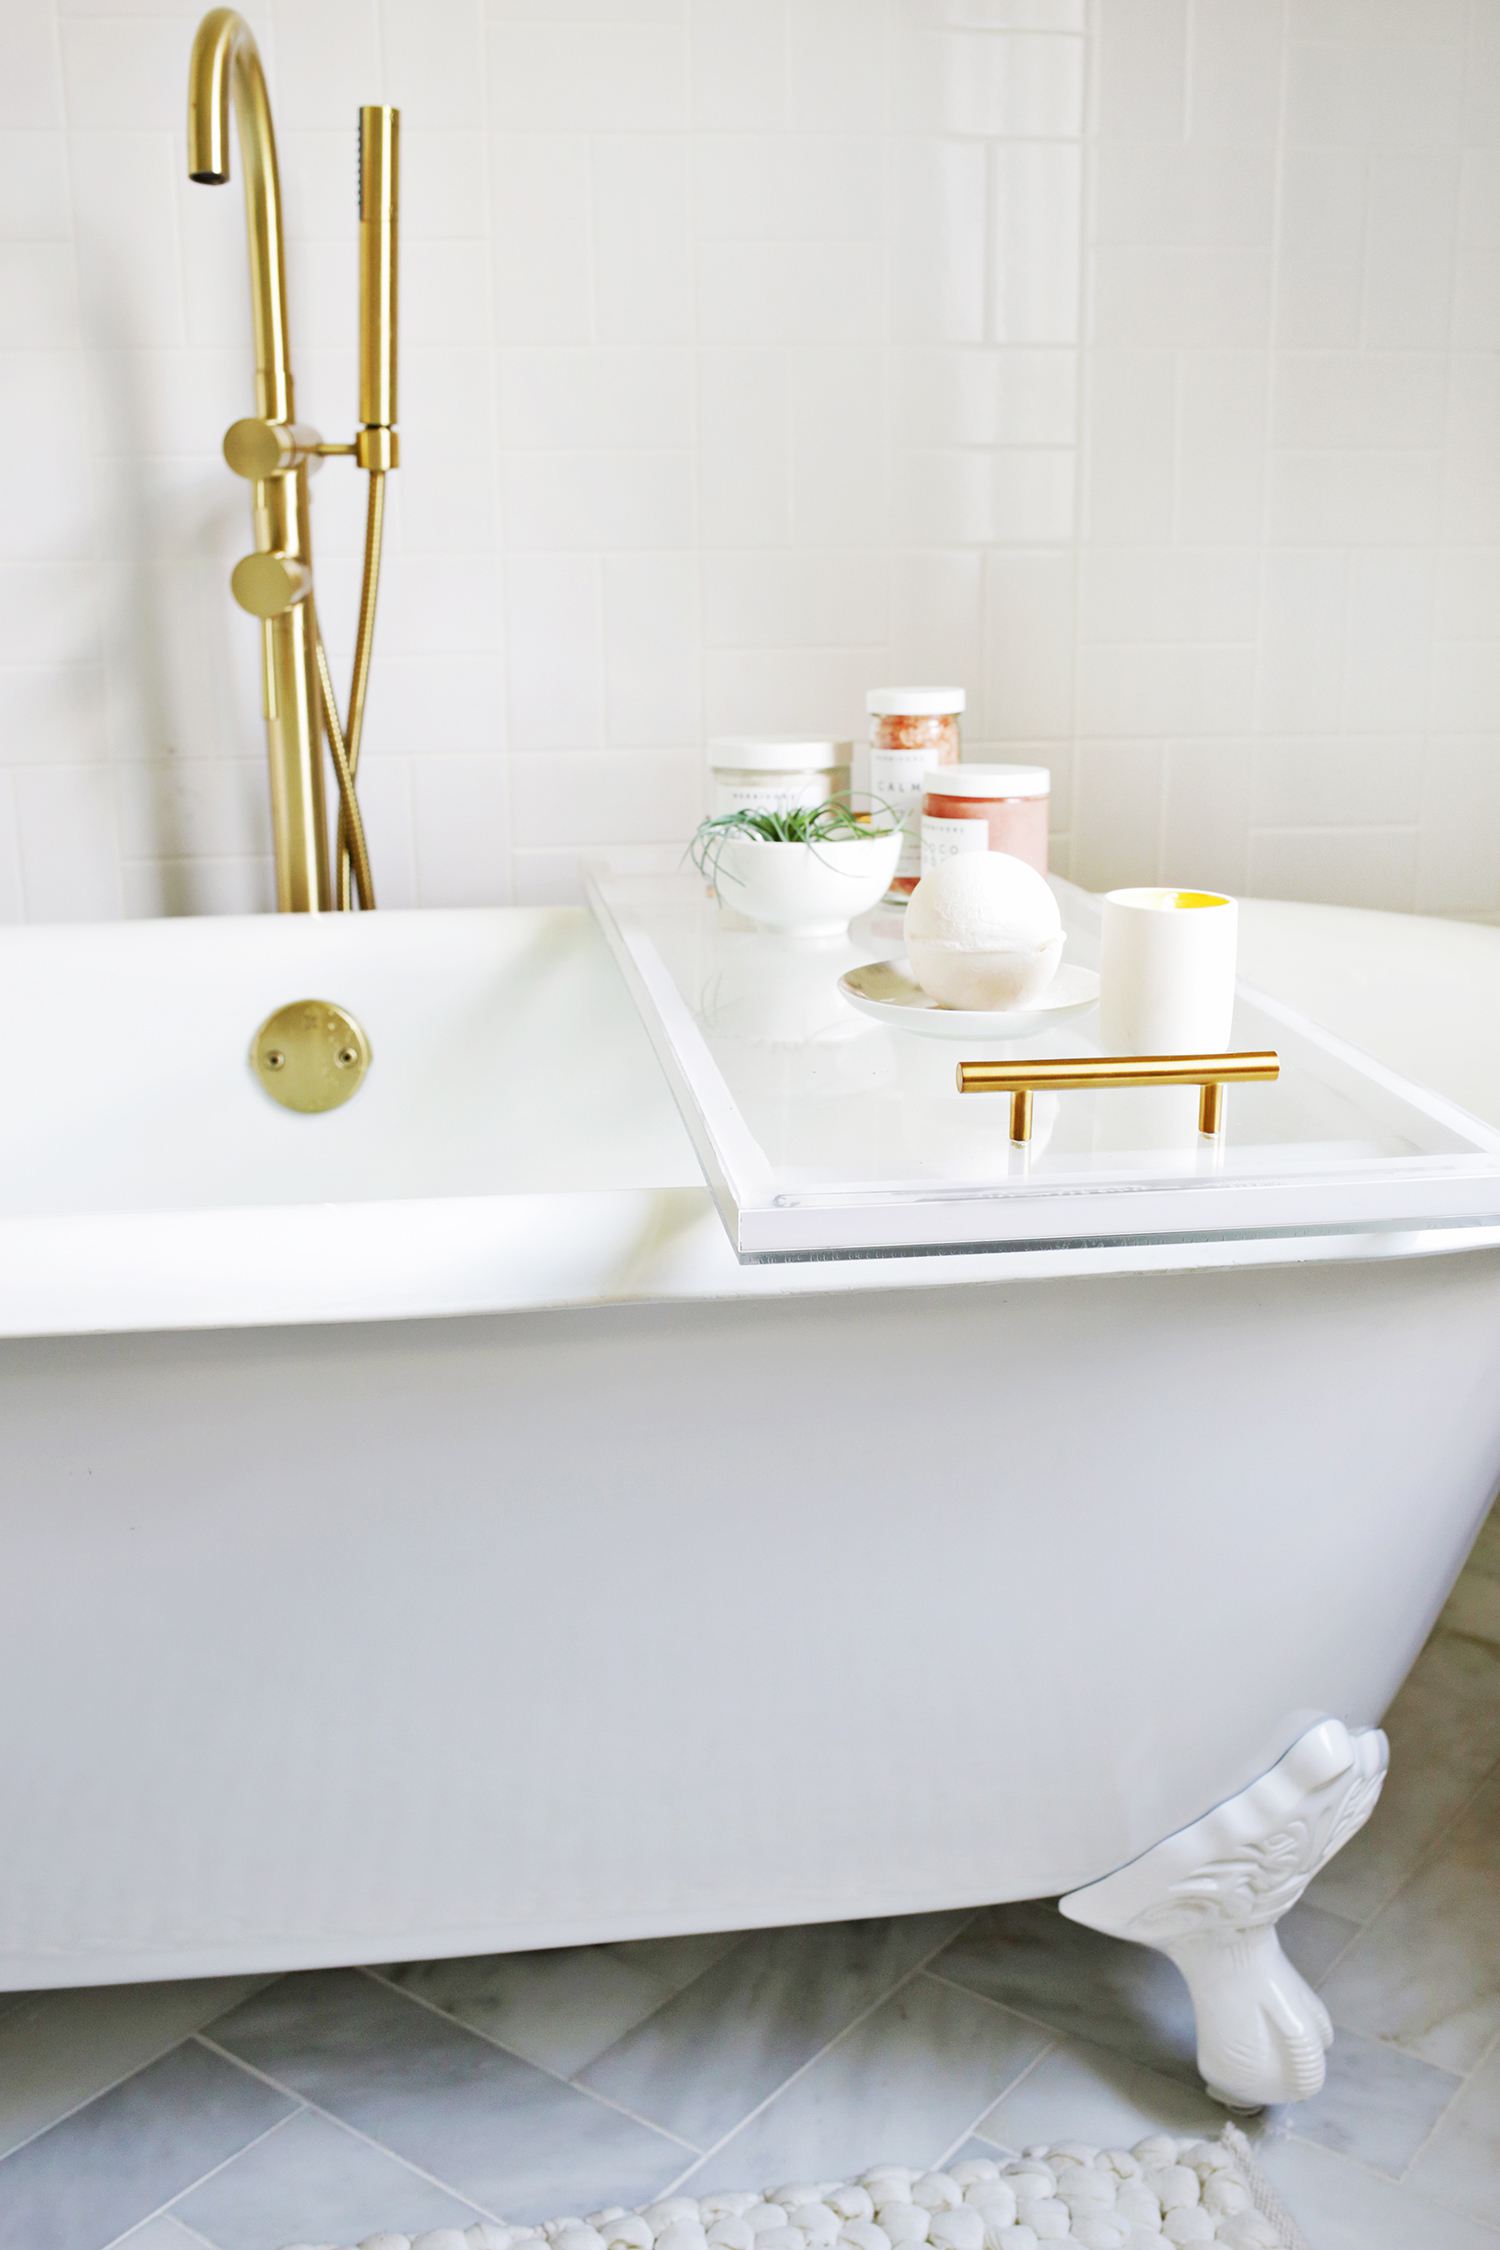 Lucite bathtub caddy resting across the top of free-standing tub